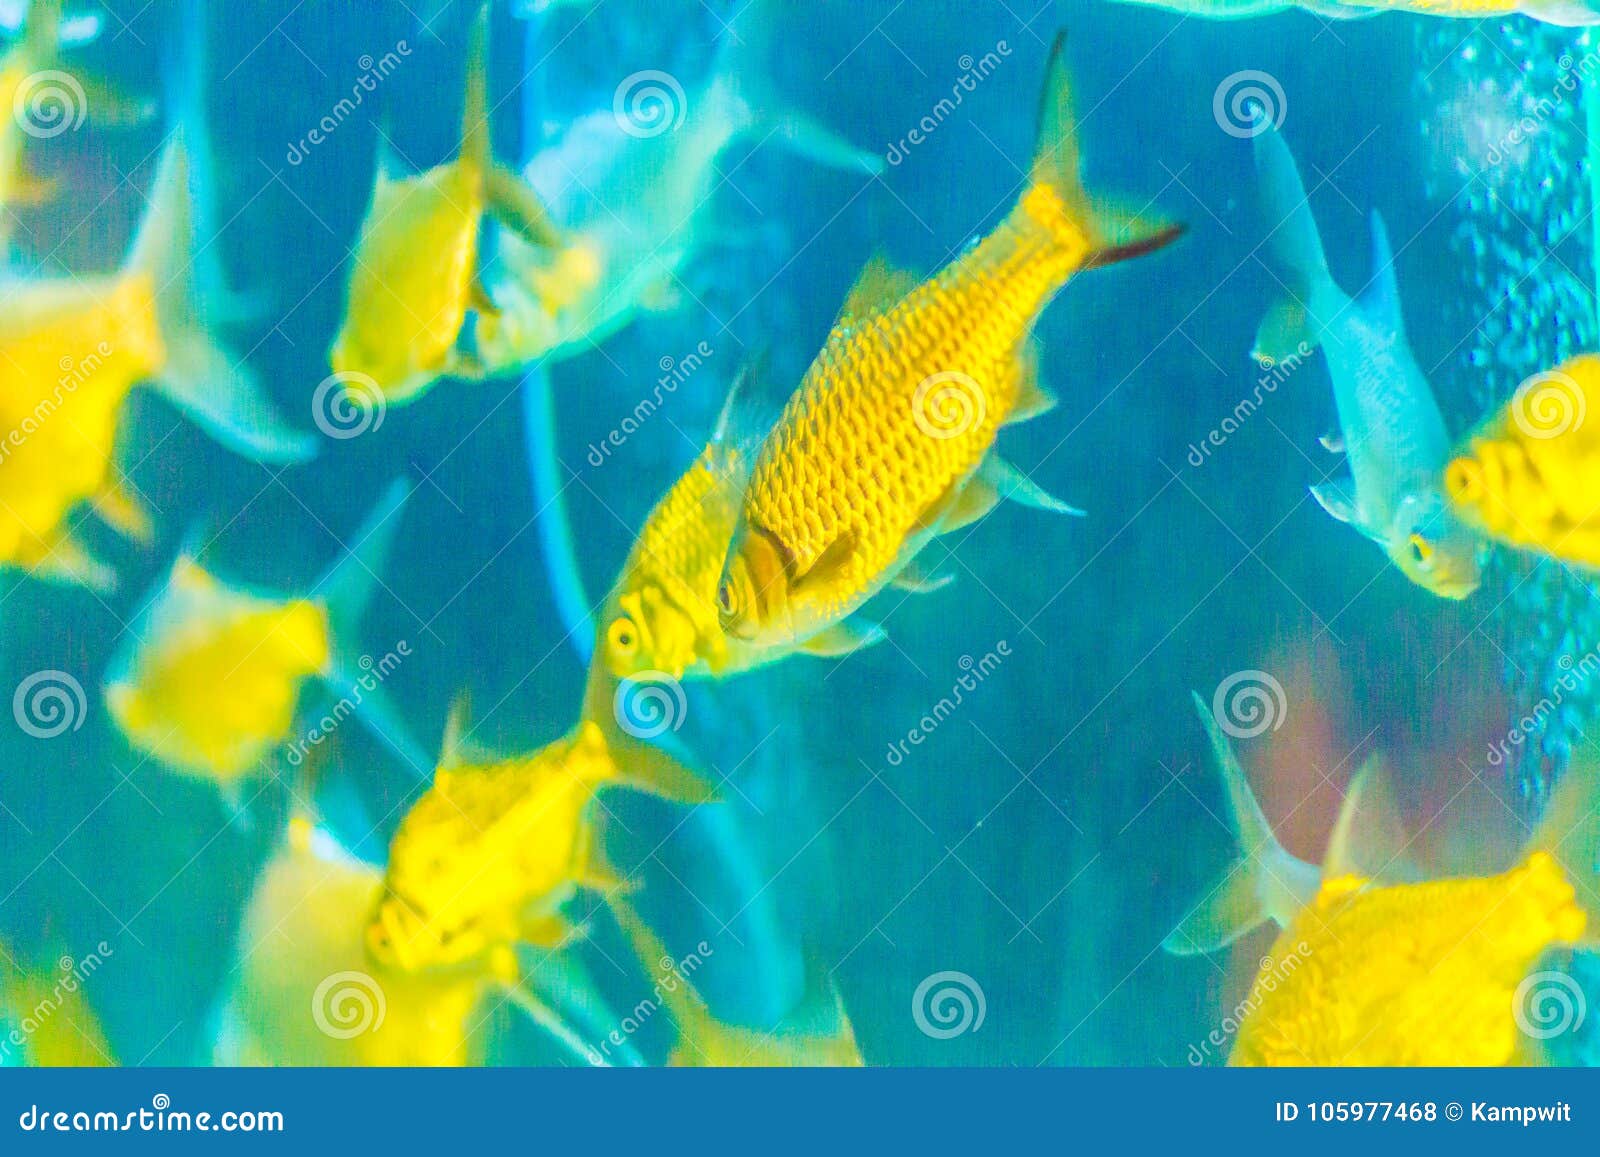 652 Minnows Stock Photos - Free & Royalty-Free Stock Photos from Dreamstime